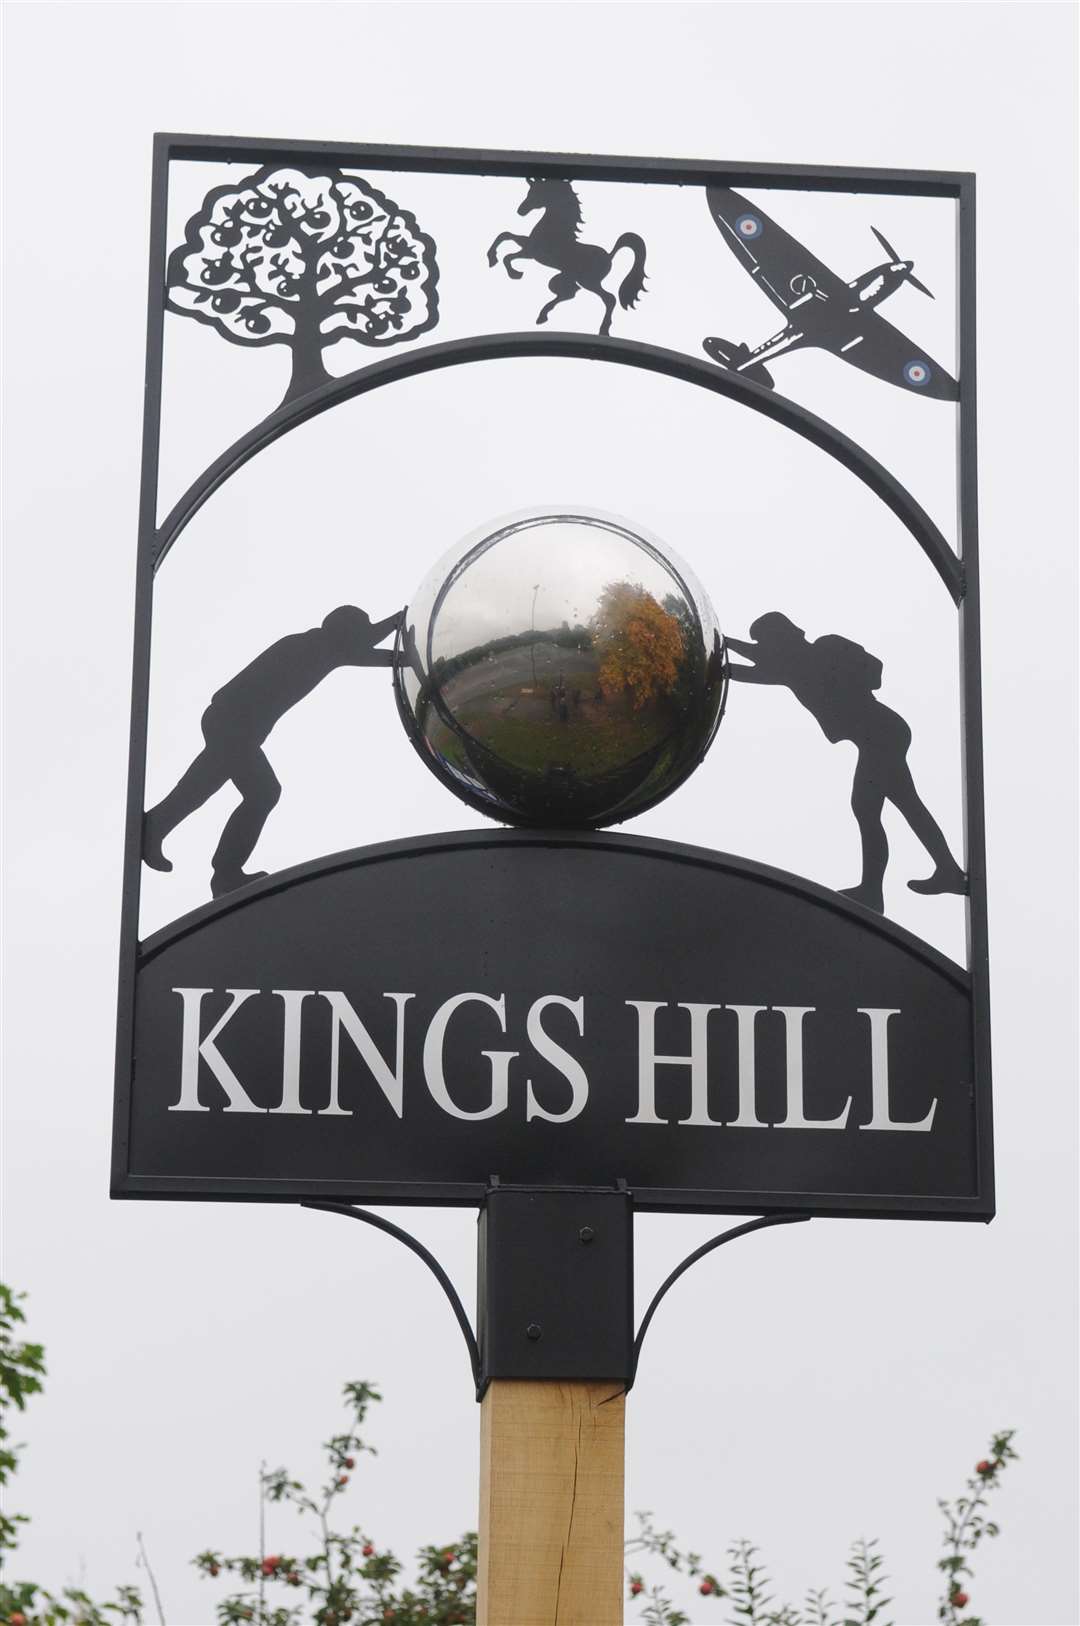 Kings Hill residents have had to bear the losses at the sports park through increases to the parish precept